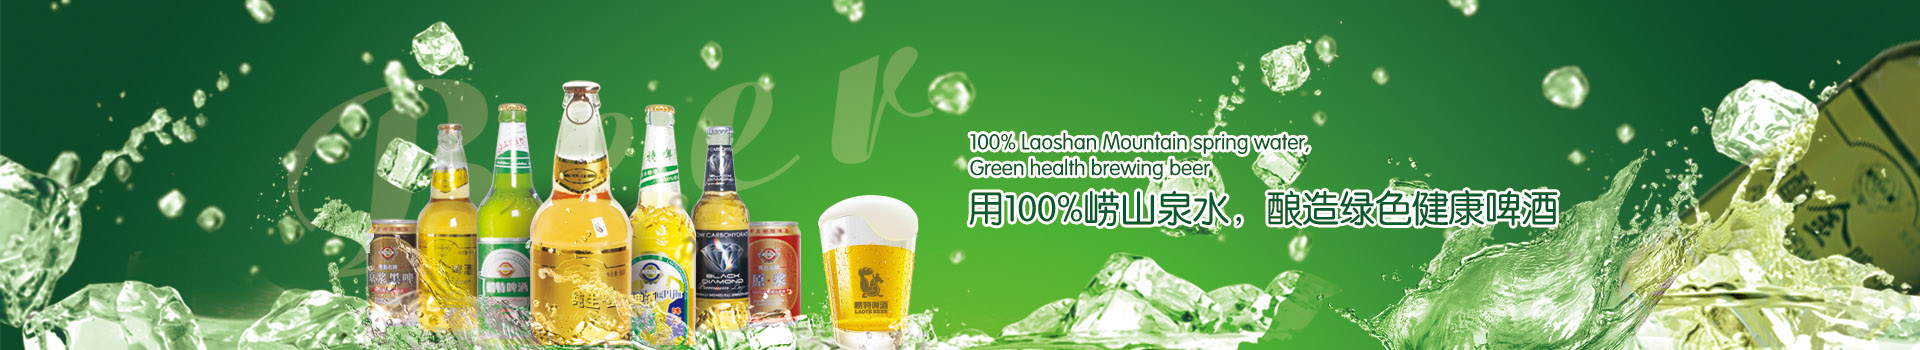 Qingdao local beer brand order a beer festival